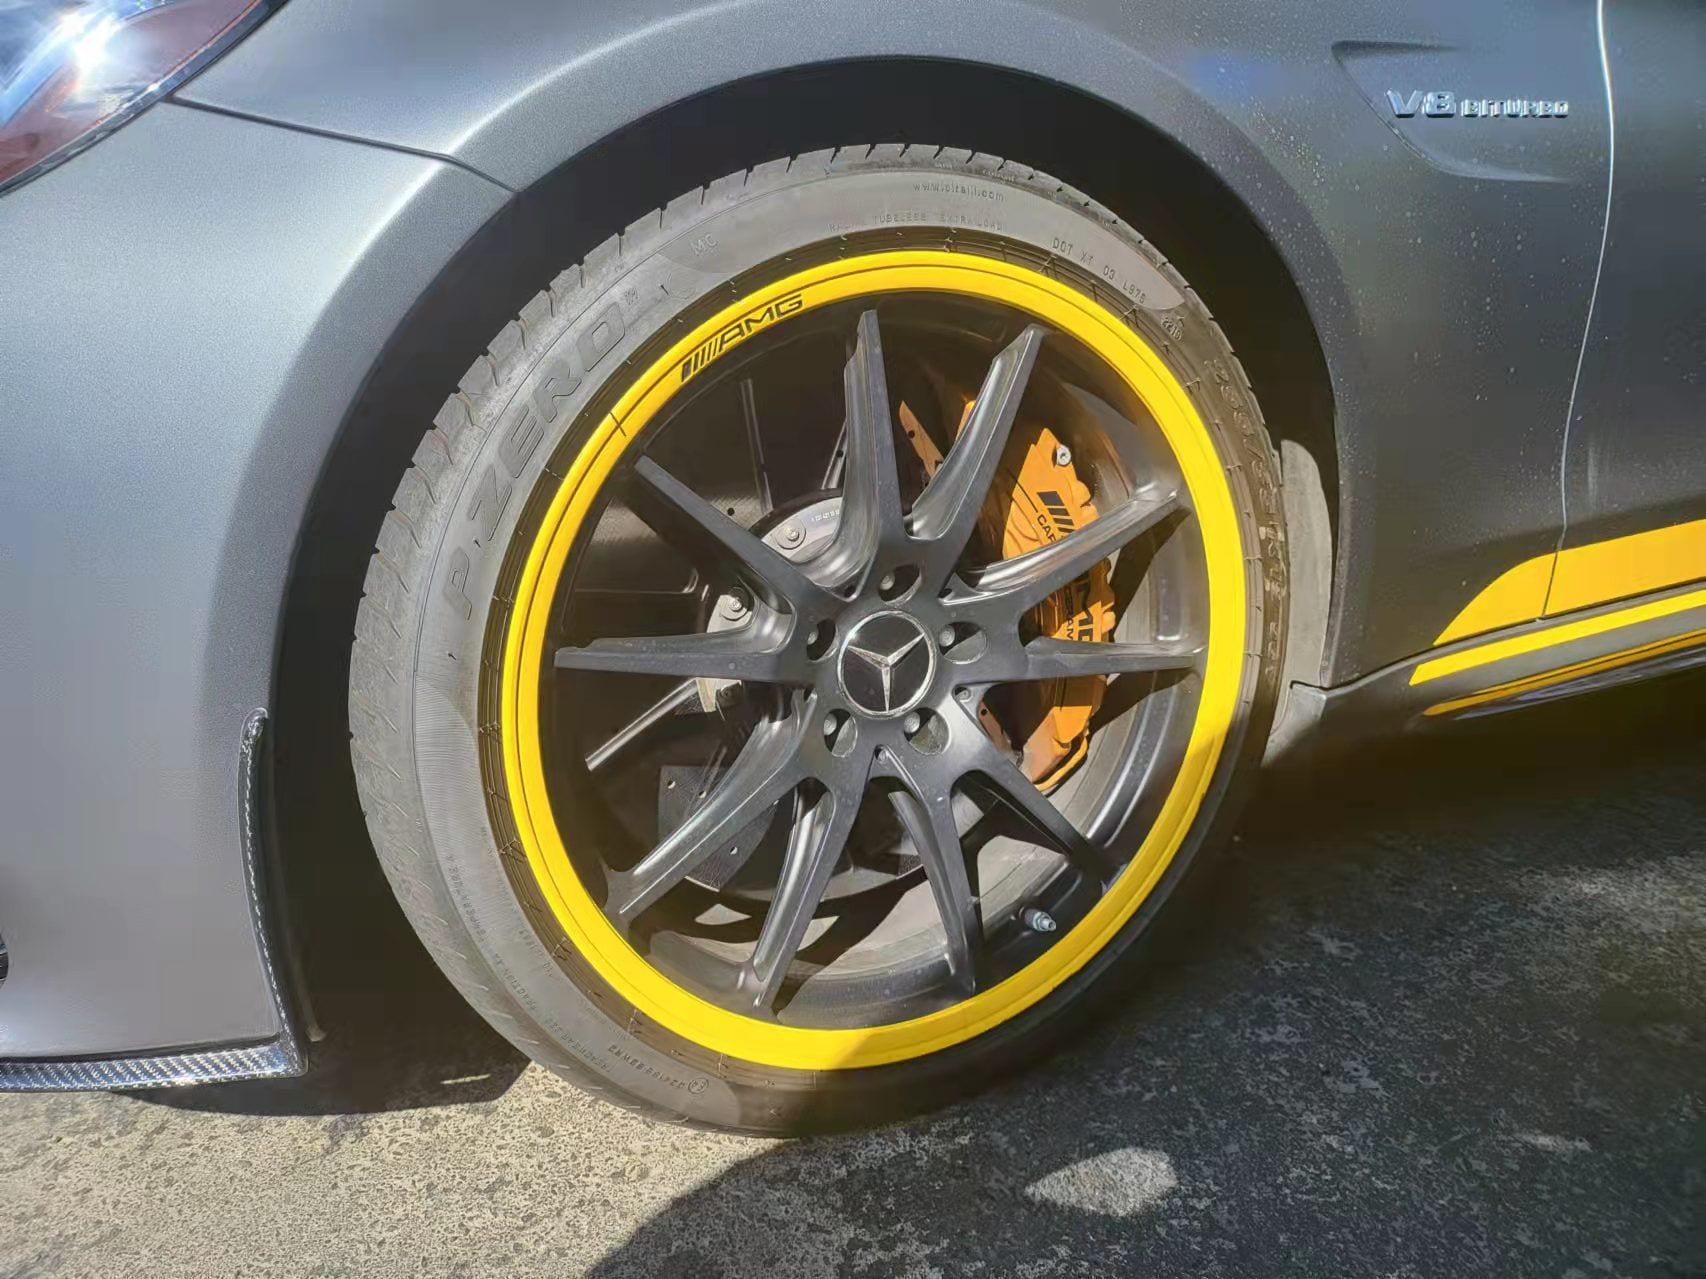 Wheels and Tires/Axles - C63s edition 1 wheels - Used - 2016 to 2021 Mercedes-Benz C63 AMG S - Riverside, CA 92507, United States